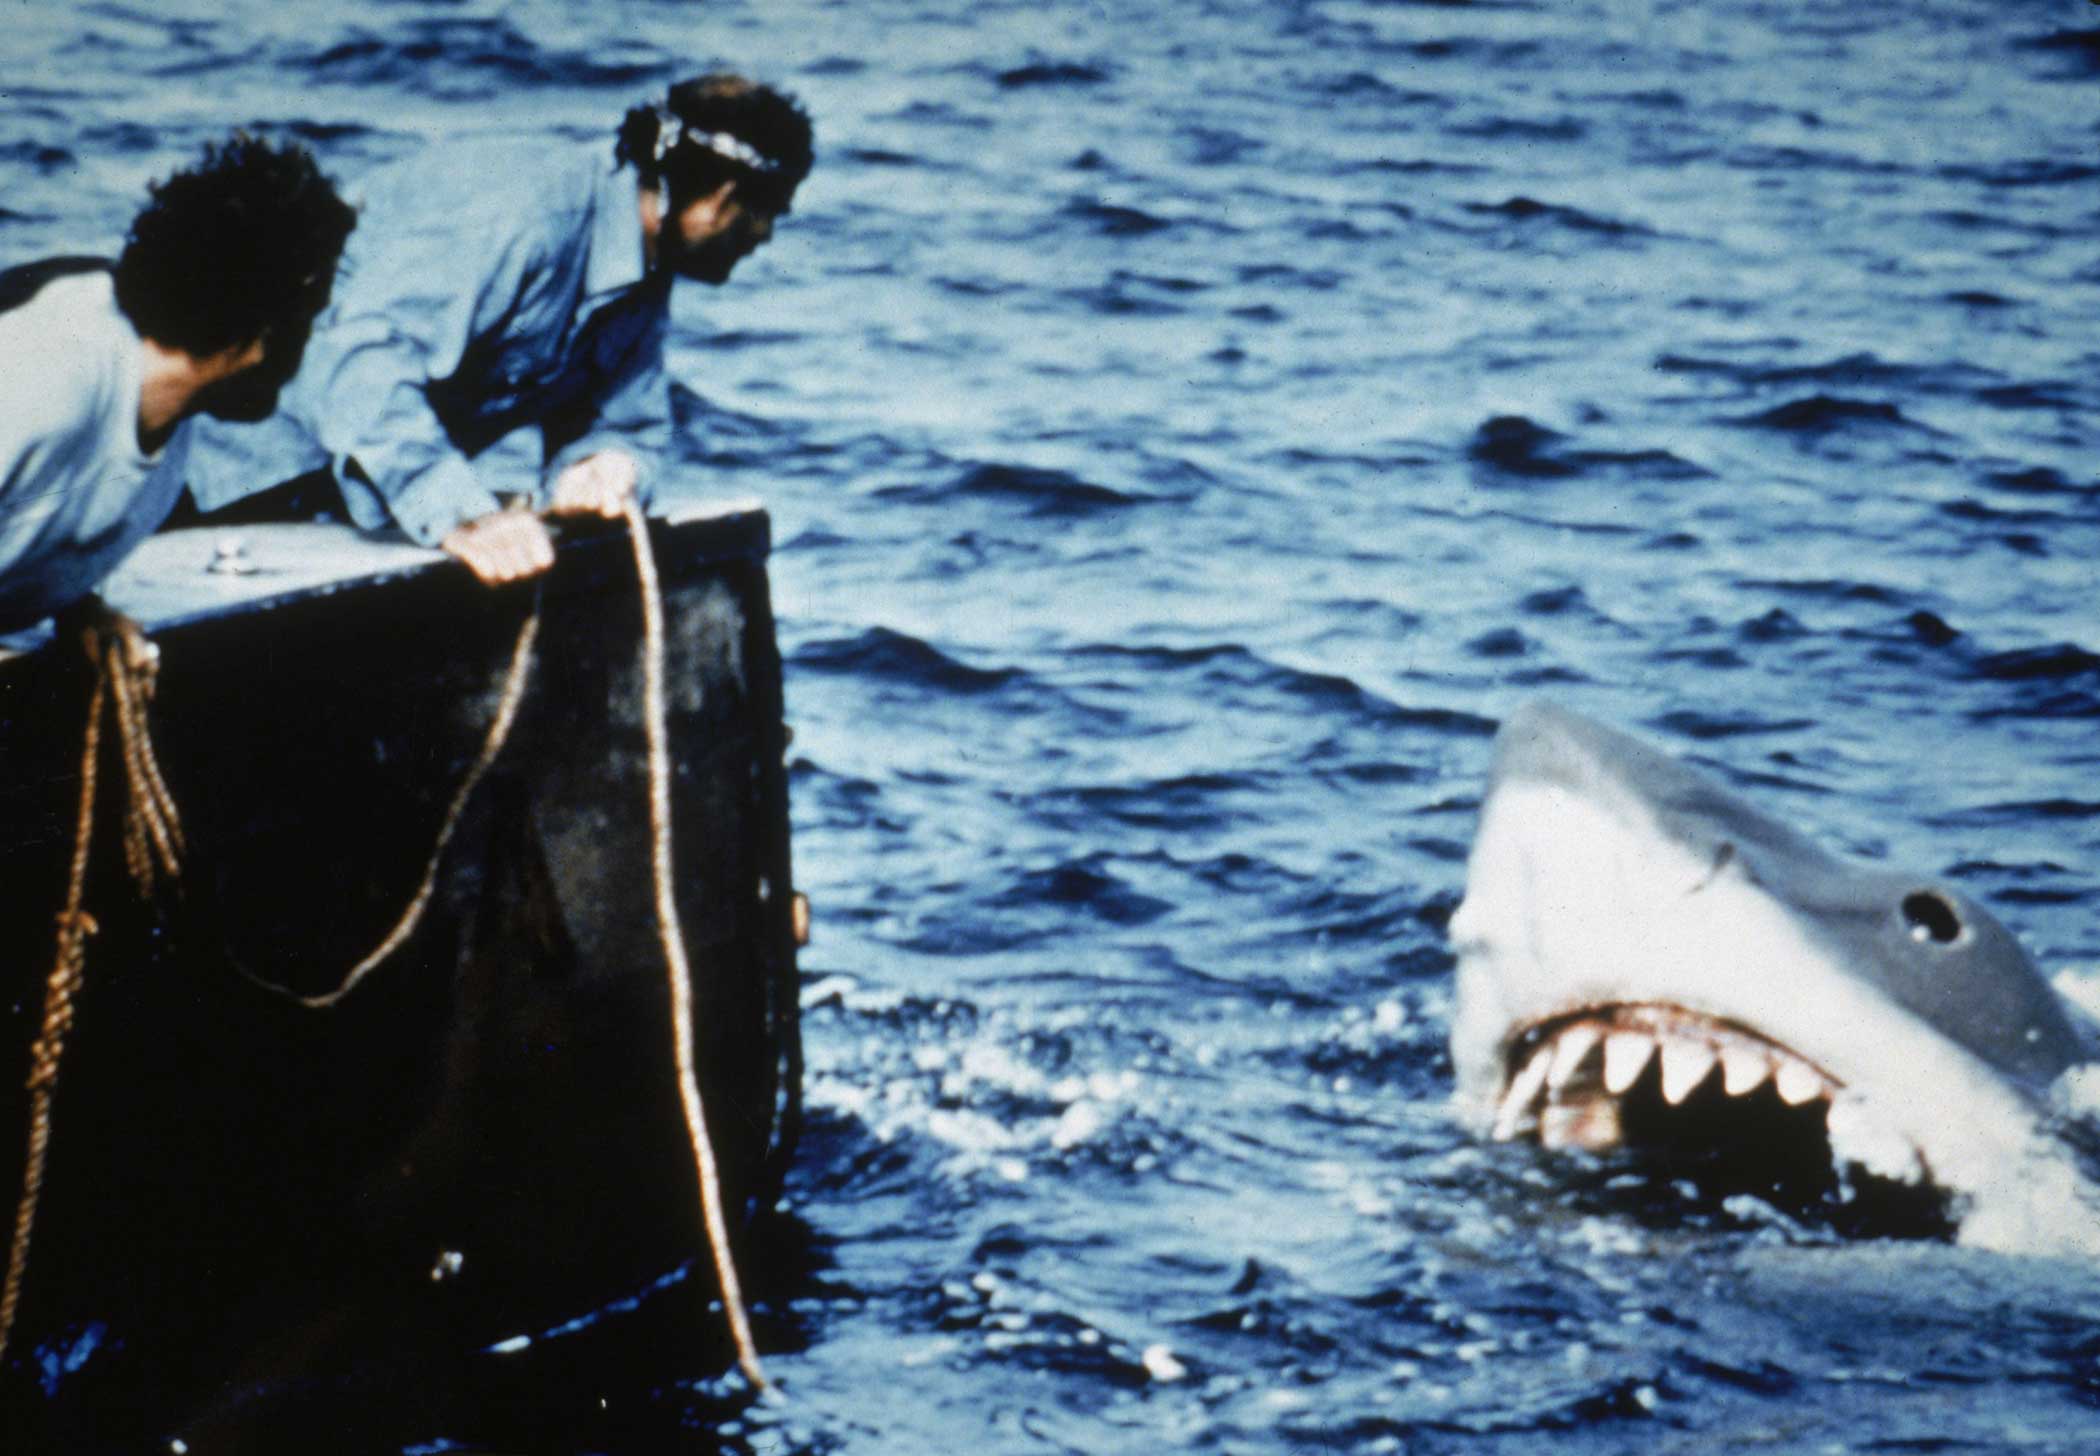 Jaws from Jaws, 1975.